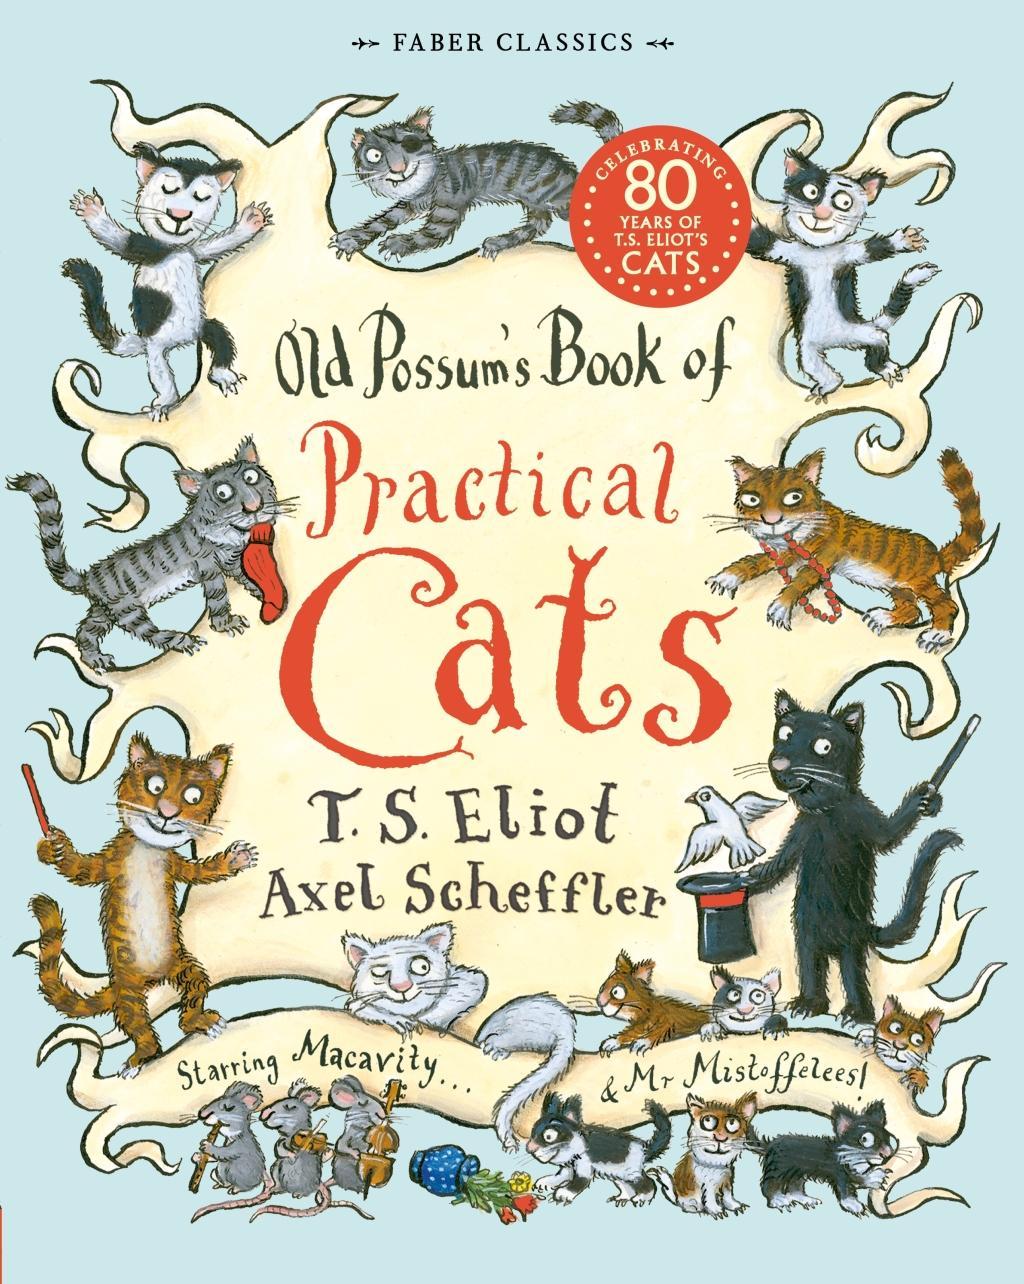 Old Possum's Book of Practical Cats / Thomas Stearns Eliot / Taschenbuch / 64 S. / Englisch / 2011 / Faber And Faber Ltd. / EAN 9780571252480 - Eliot, Thomas Stearns